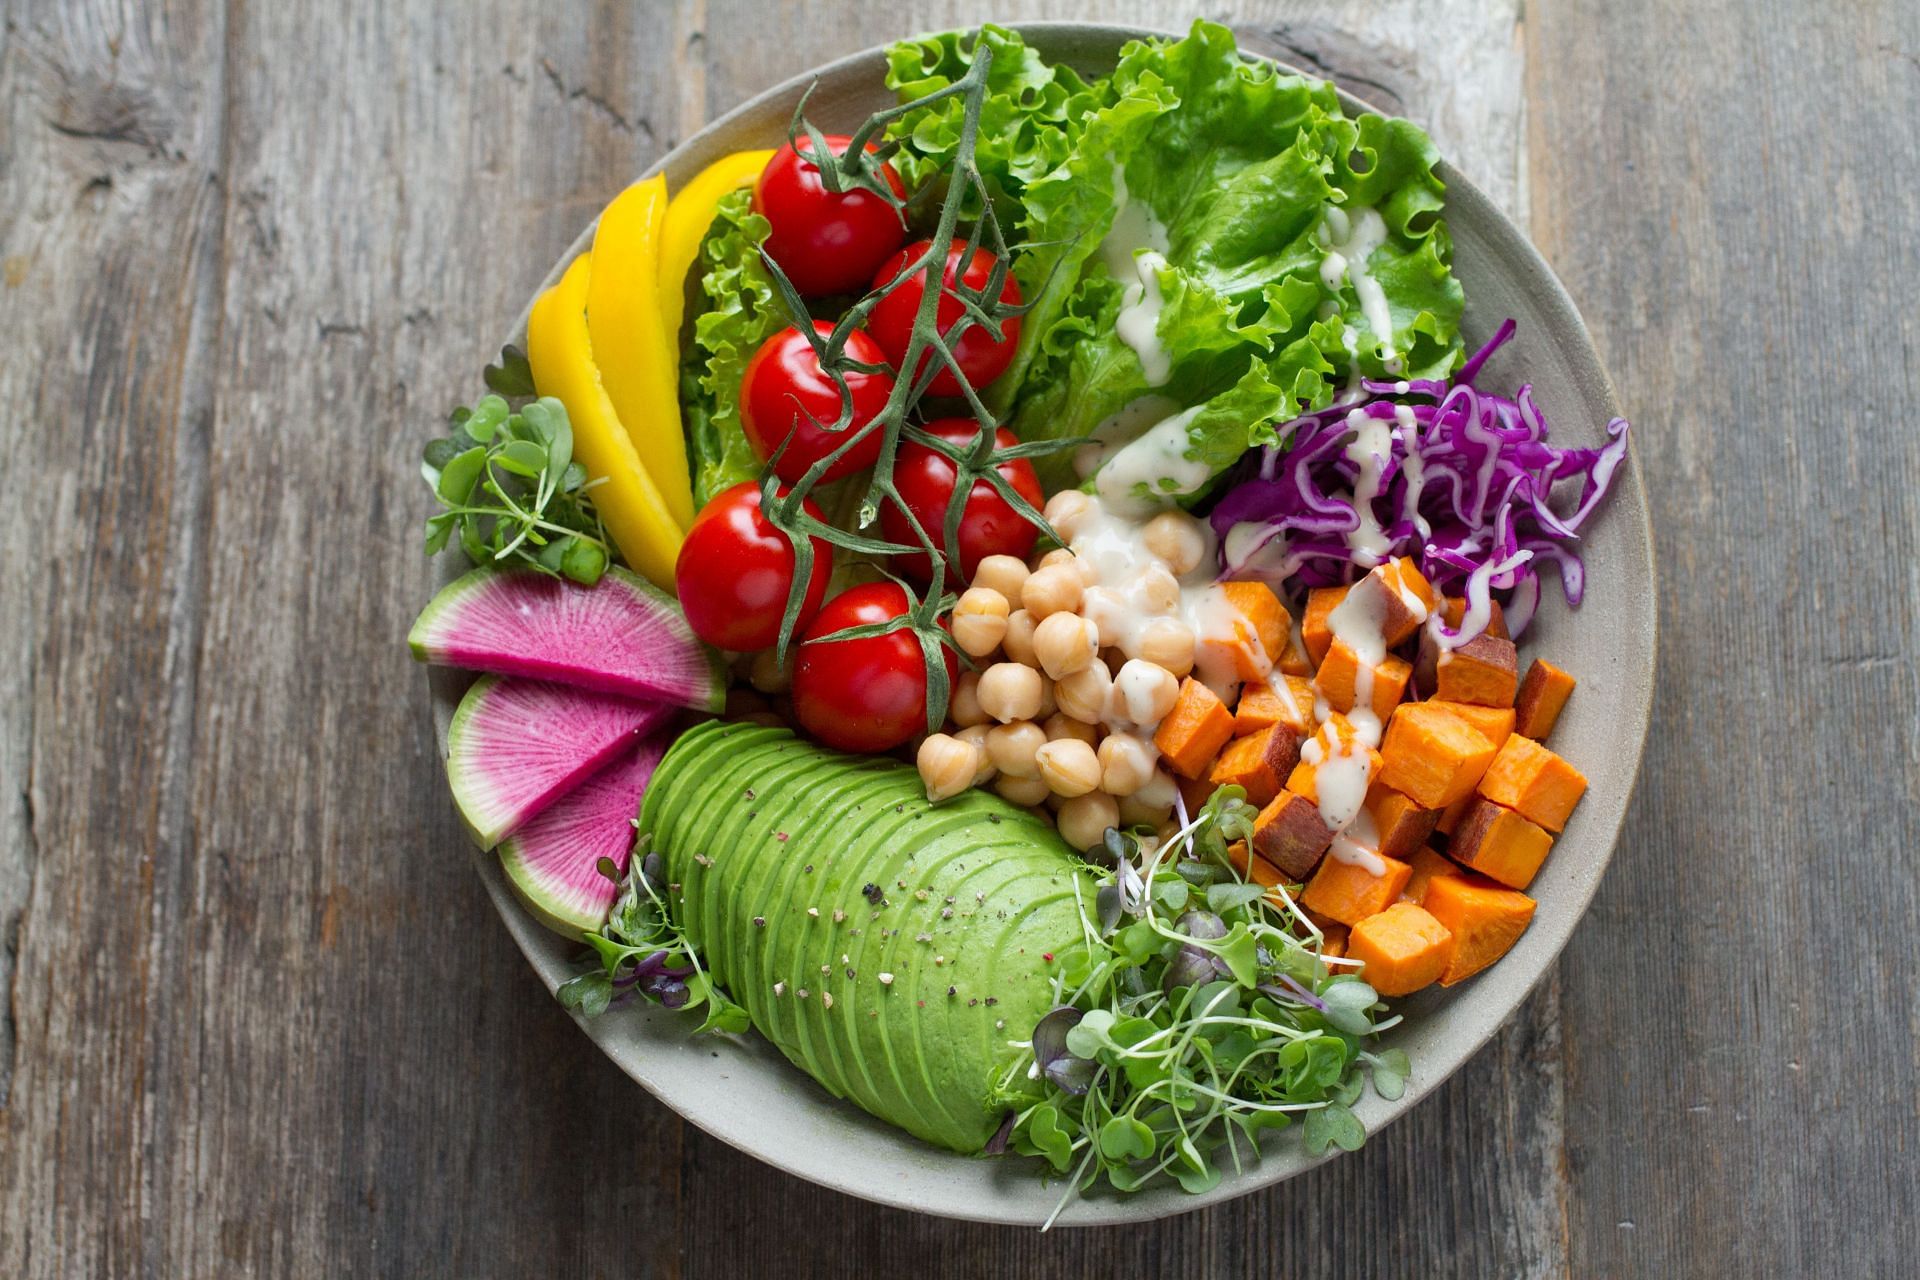 Try to include a variety of salads in your low inflammation diet. (Image via Unsplash/Anna Pelzer)